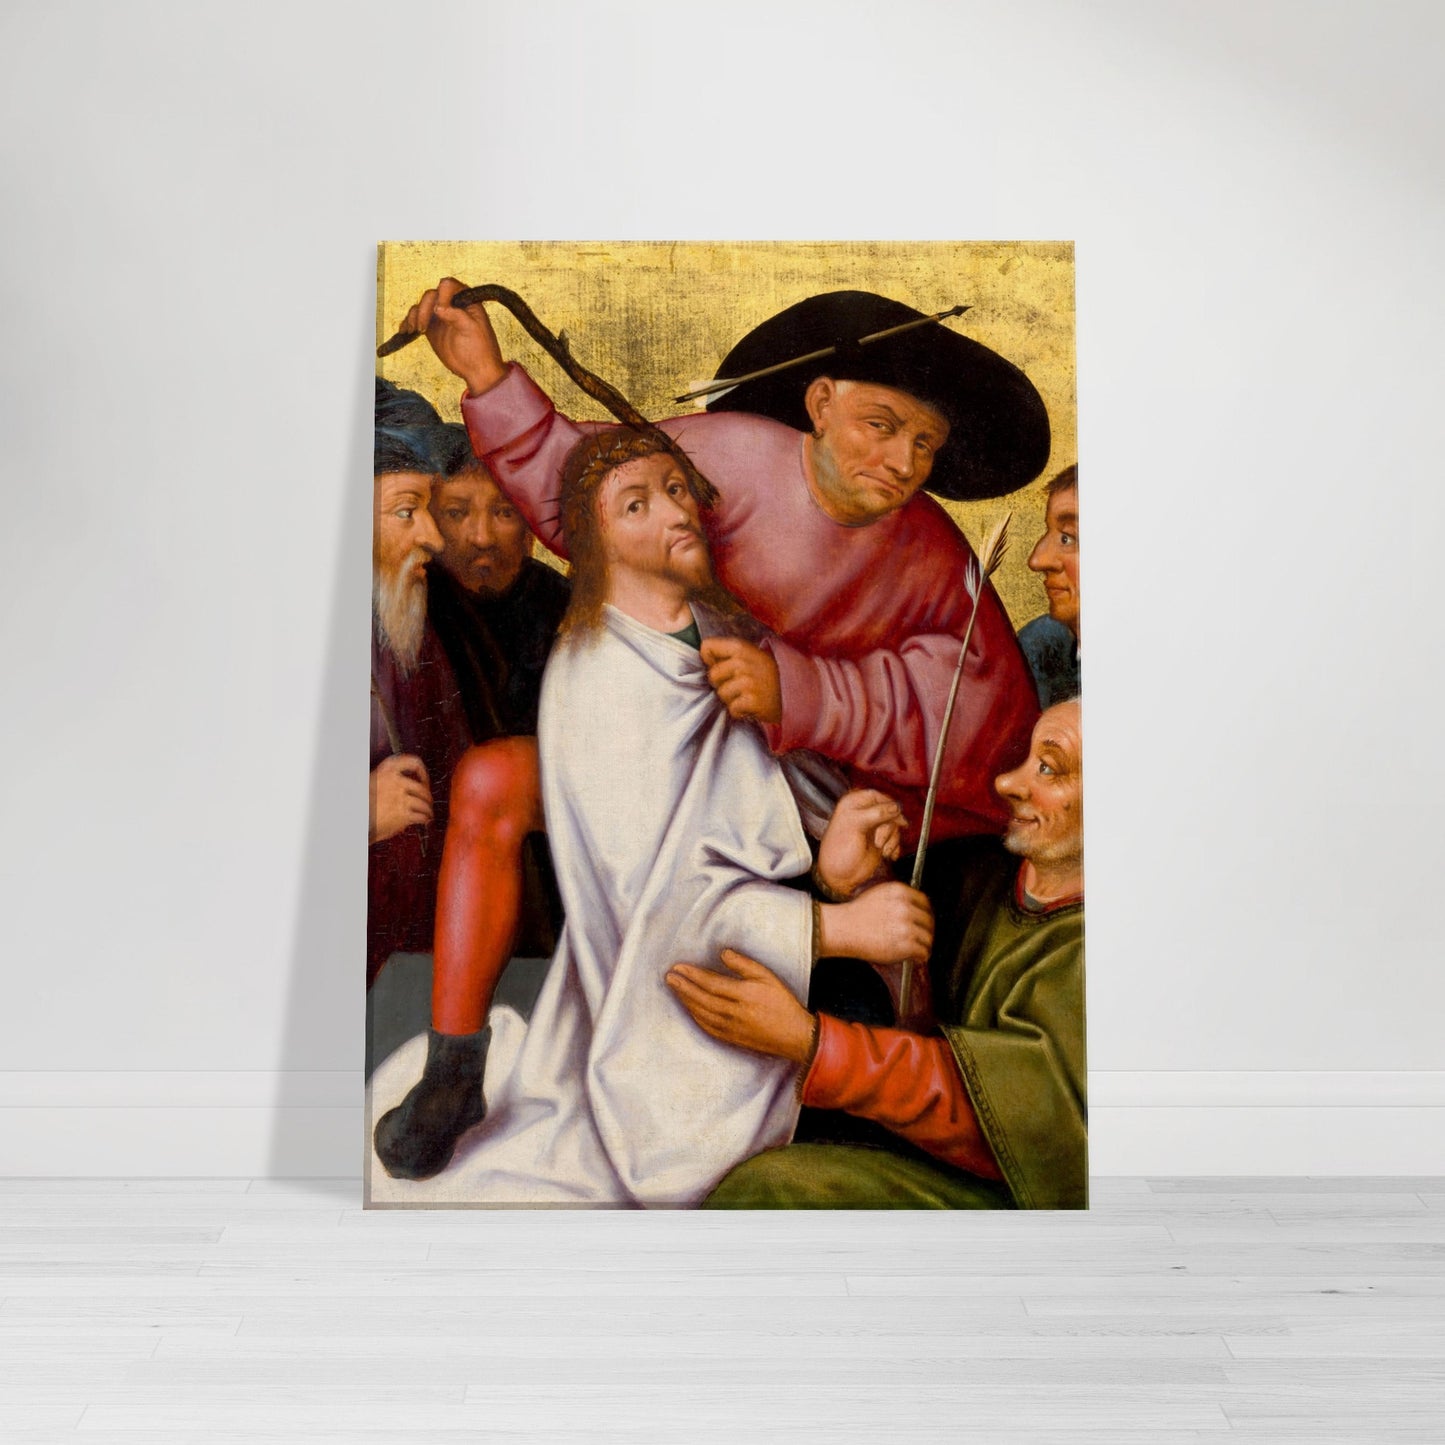 HIERONIM BOSCH - CHRIST CROWNED WITH THORNS - CANVAS ART PRINT